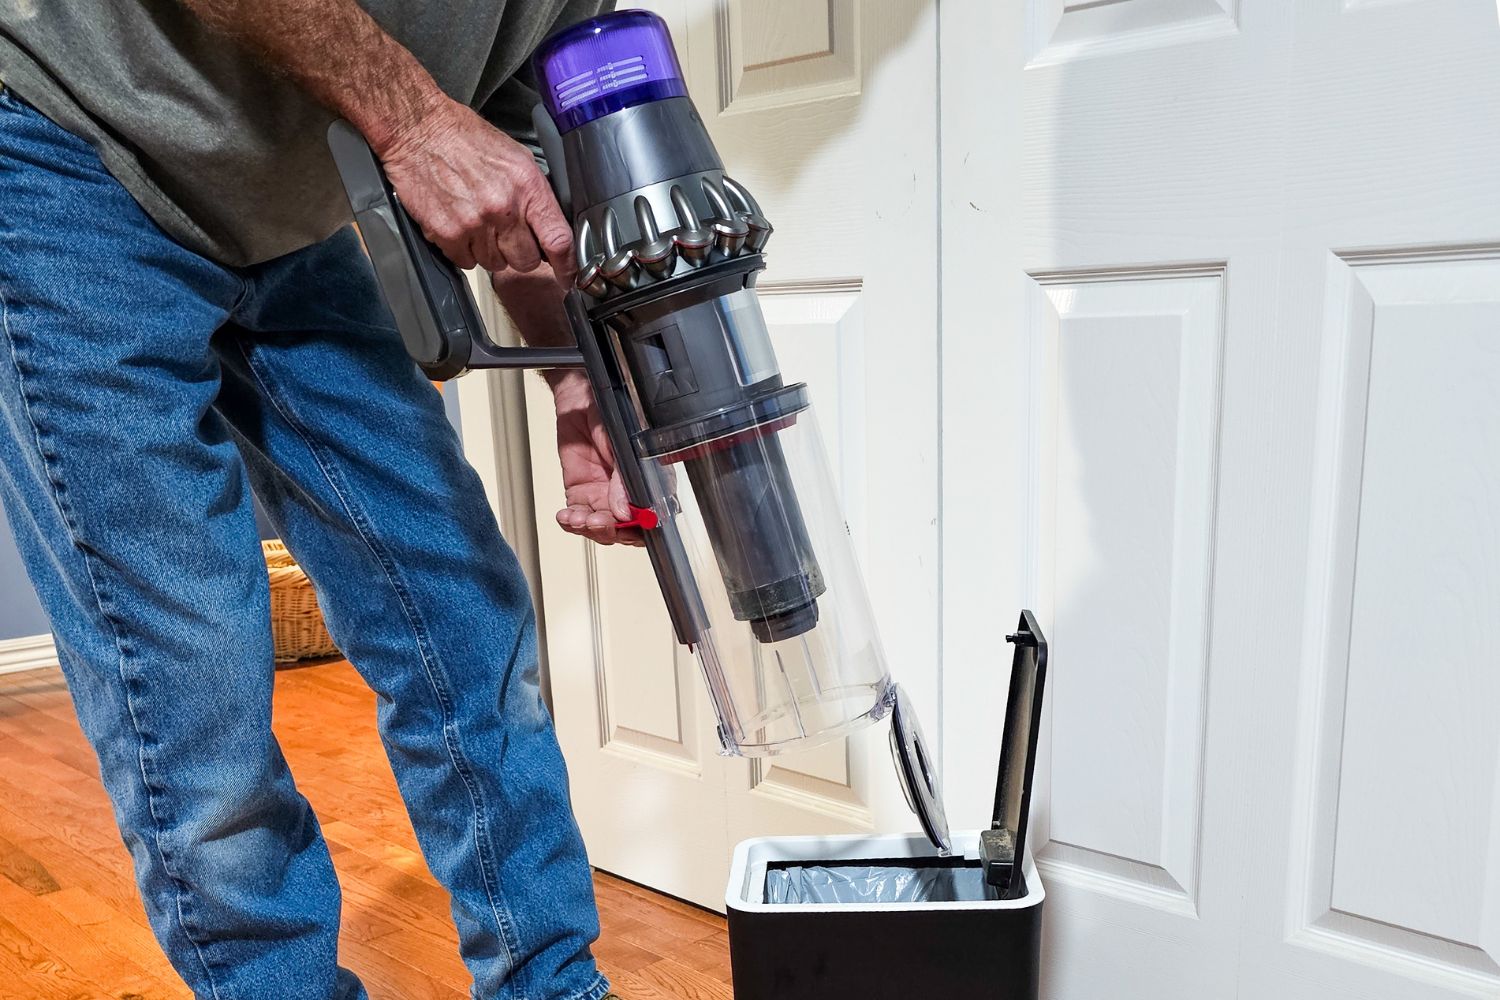 A person emptying the Dyson Outsize cordless vacuum dustbin into a small trash can.